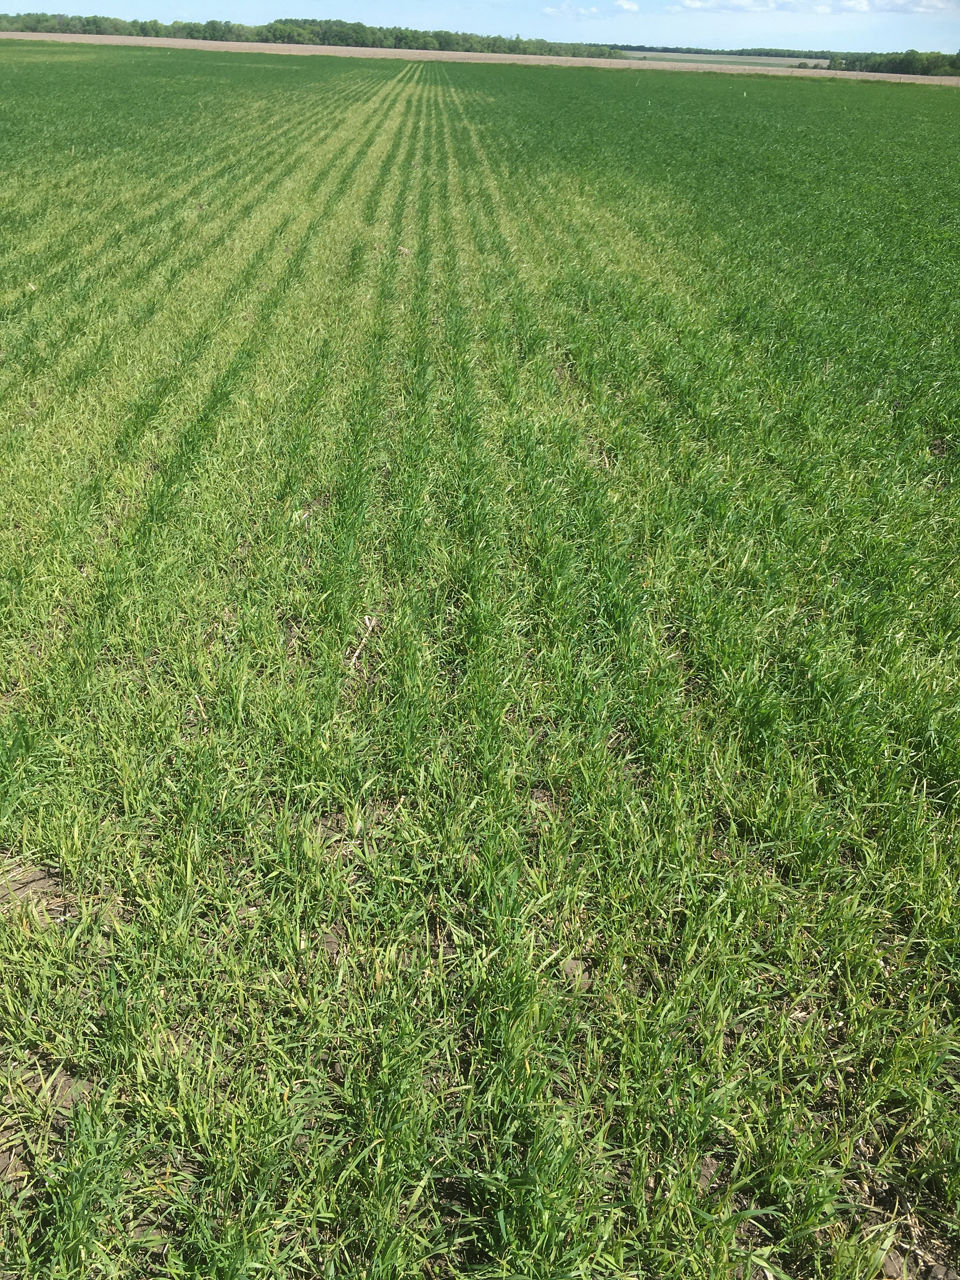 Chlorosis of wild oats between rows of wheat following application of Group 2 herbicide. Mode of Action: Acetyl-Coenzyme A Carboxylase (ACCase) inhibitors 